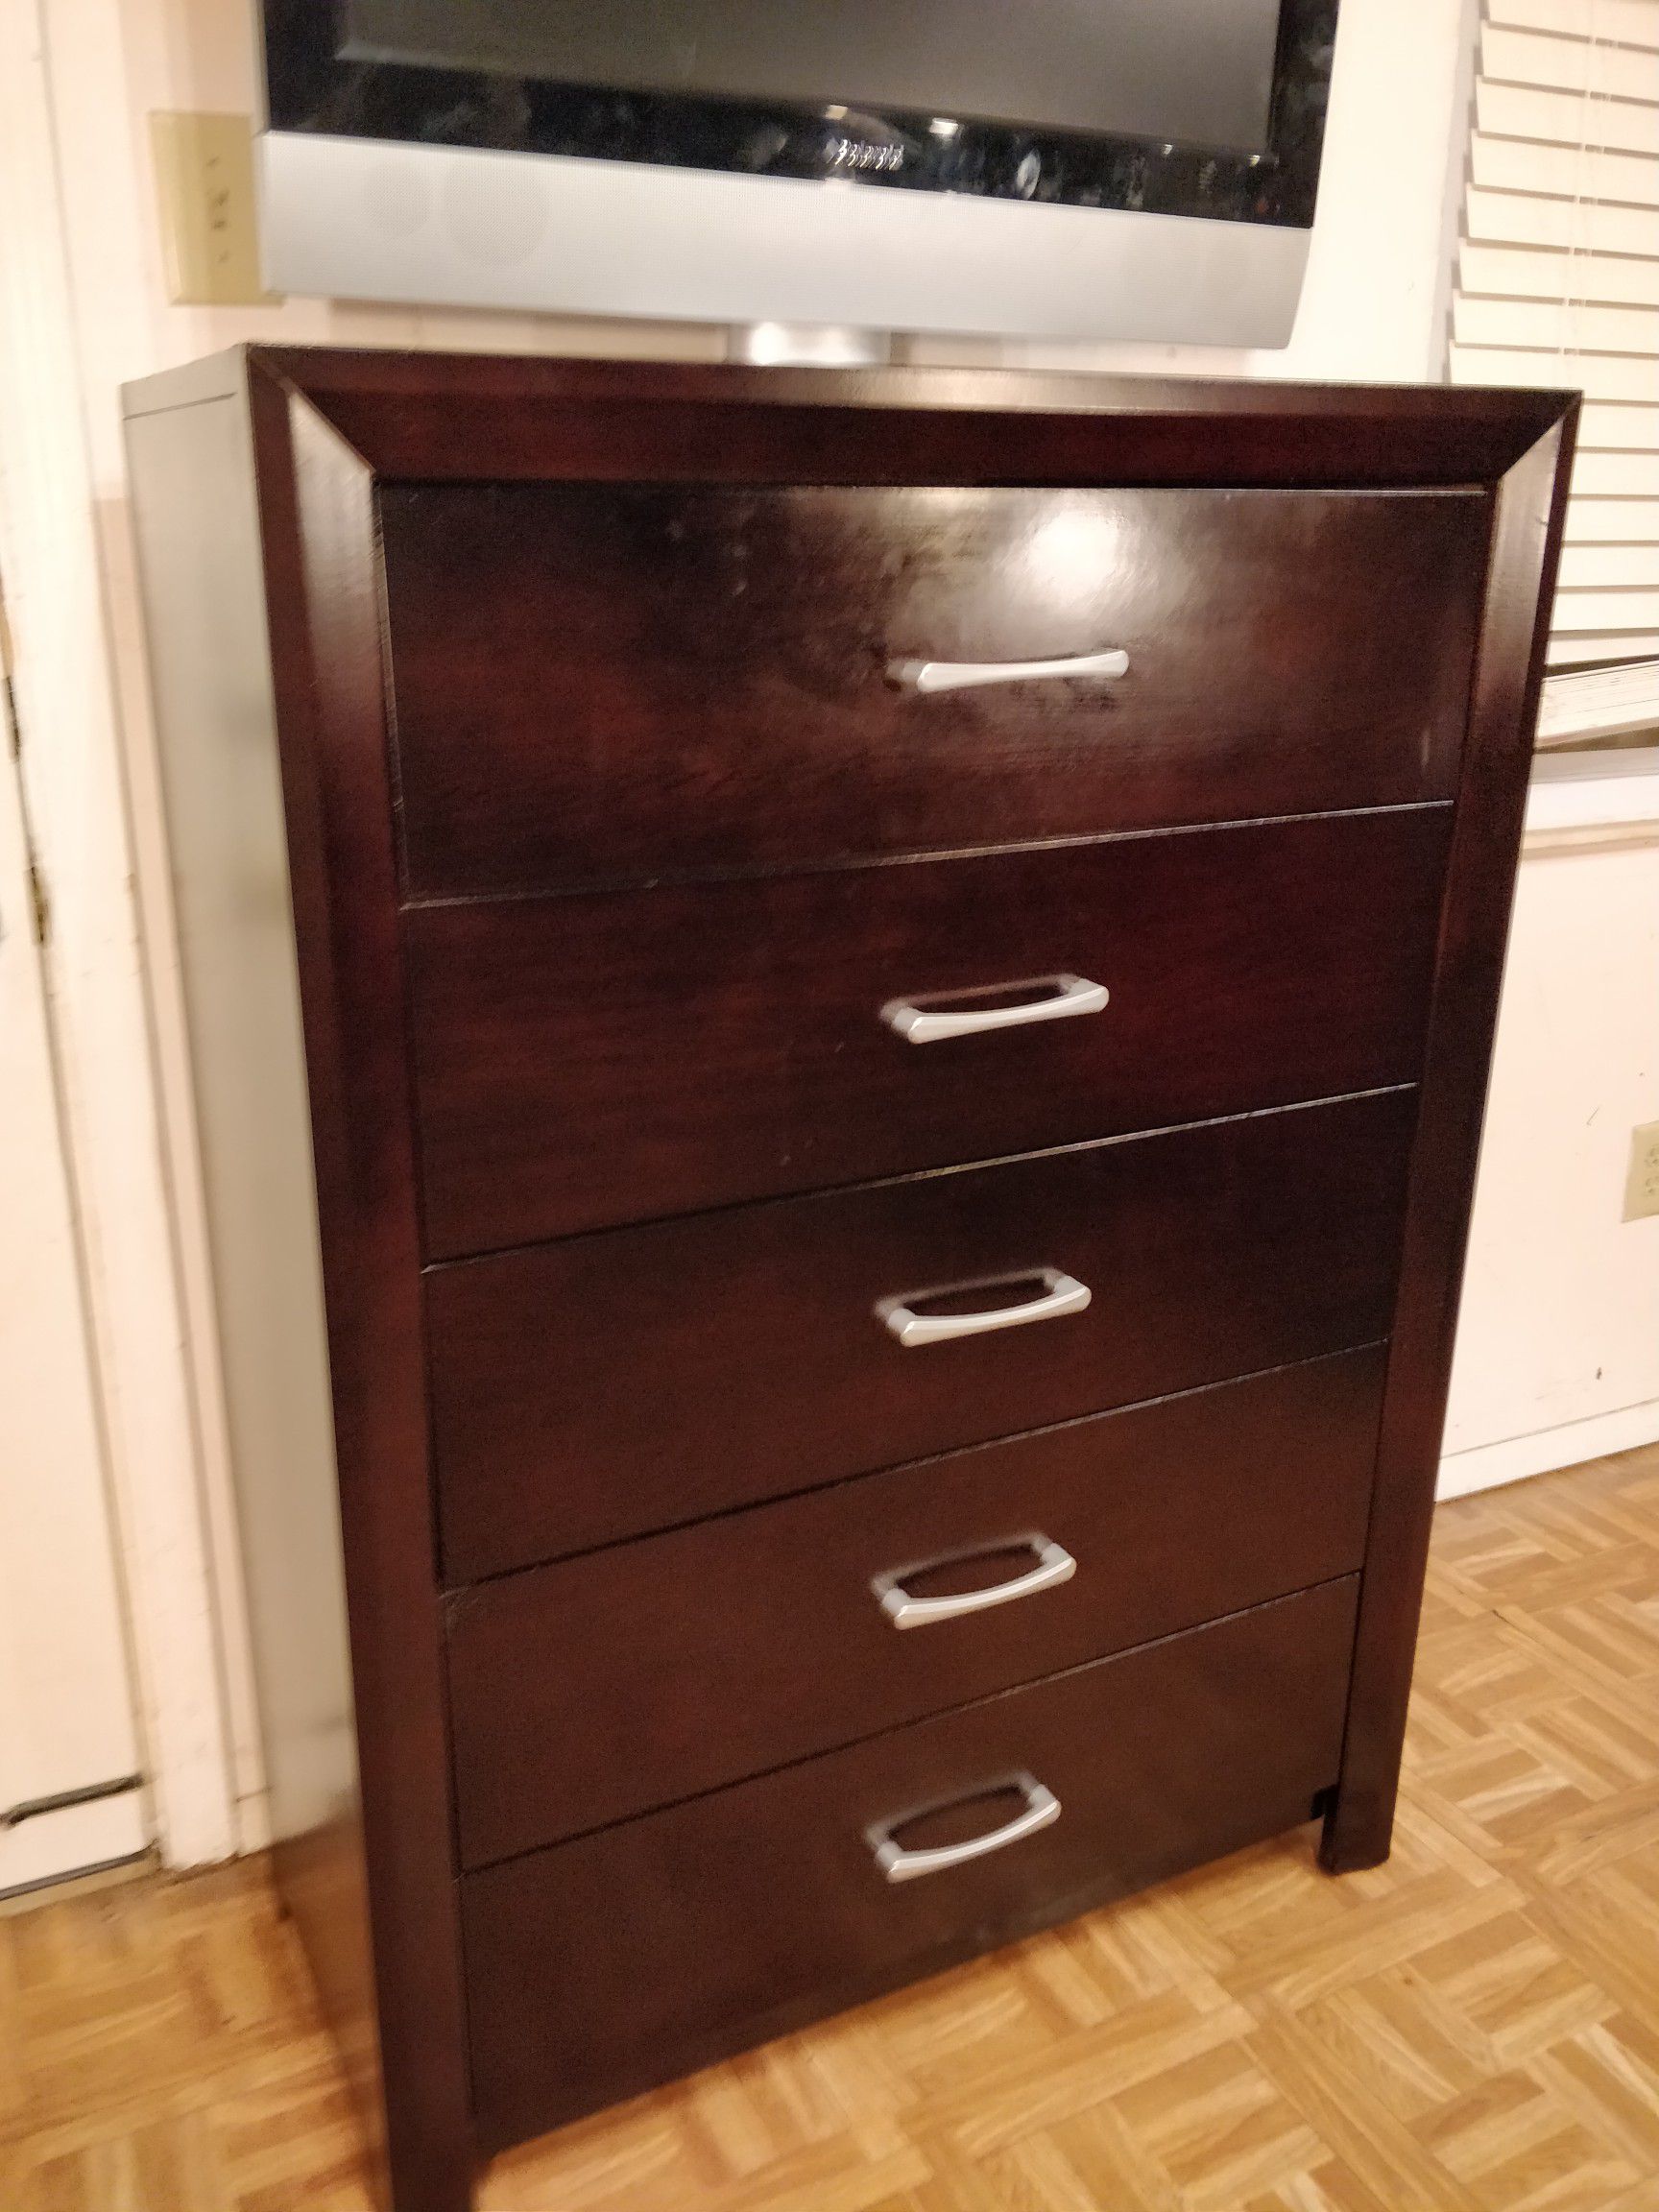 Nice black chest dresser with 5 drawers in very good condition, al drawers sliding smoothly, pet free smoke free. L35.5"*W16.5"*H48.5"